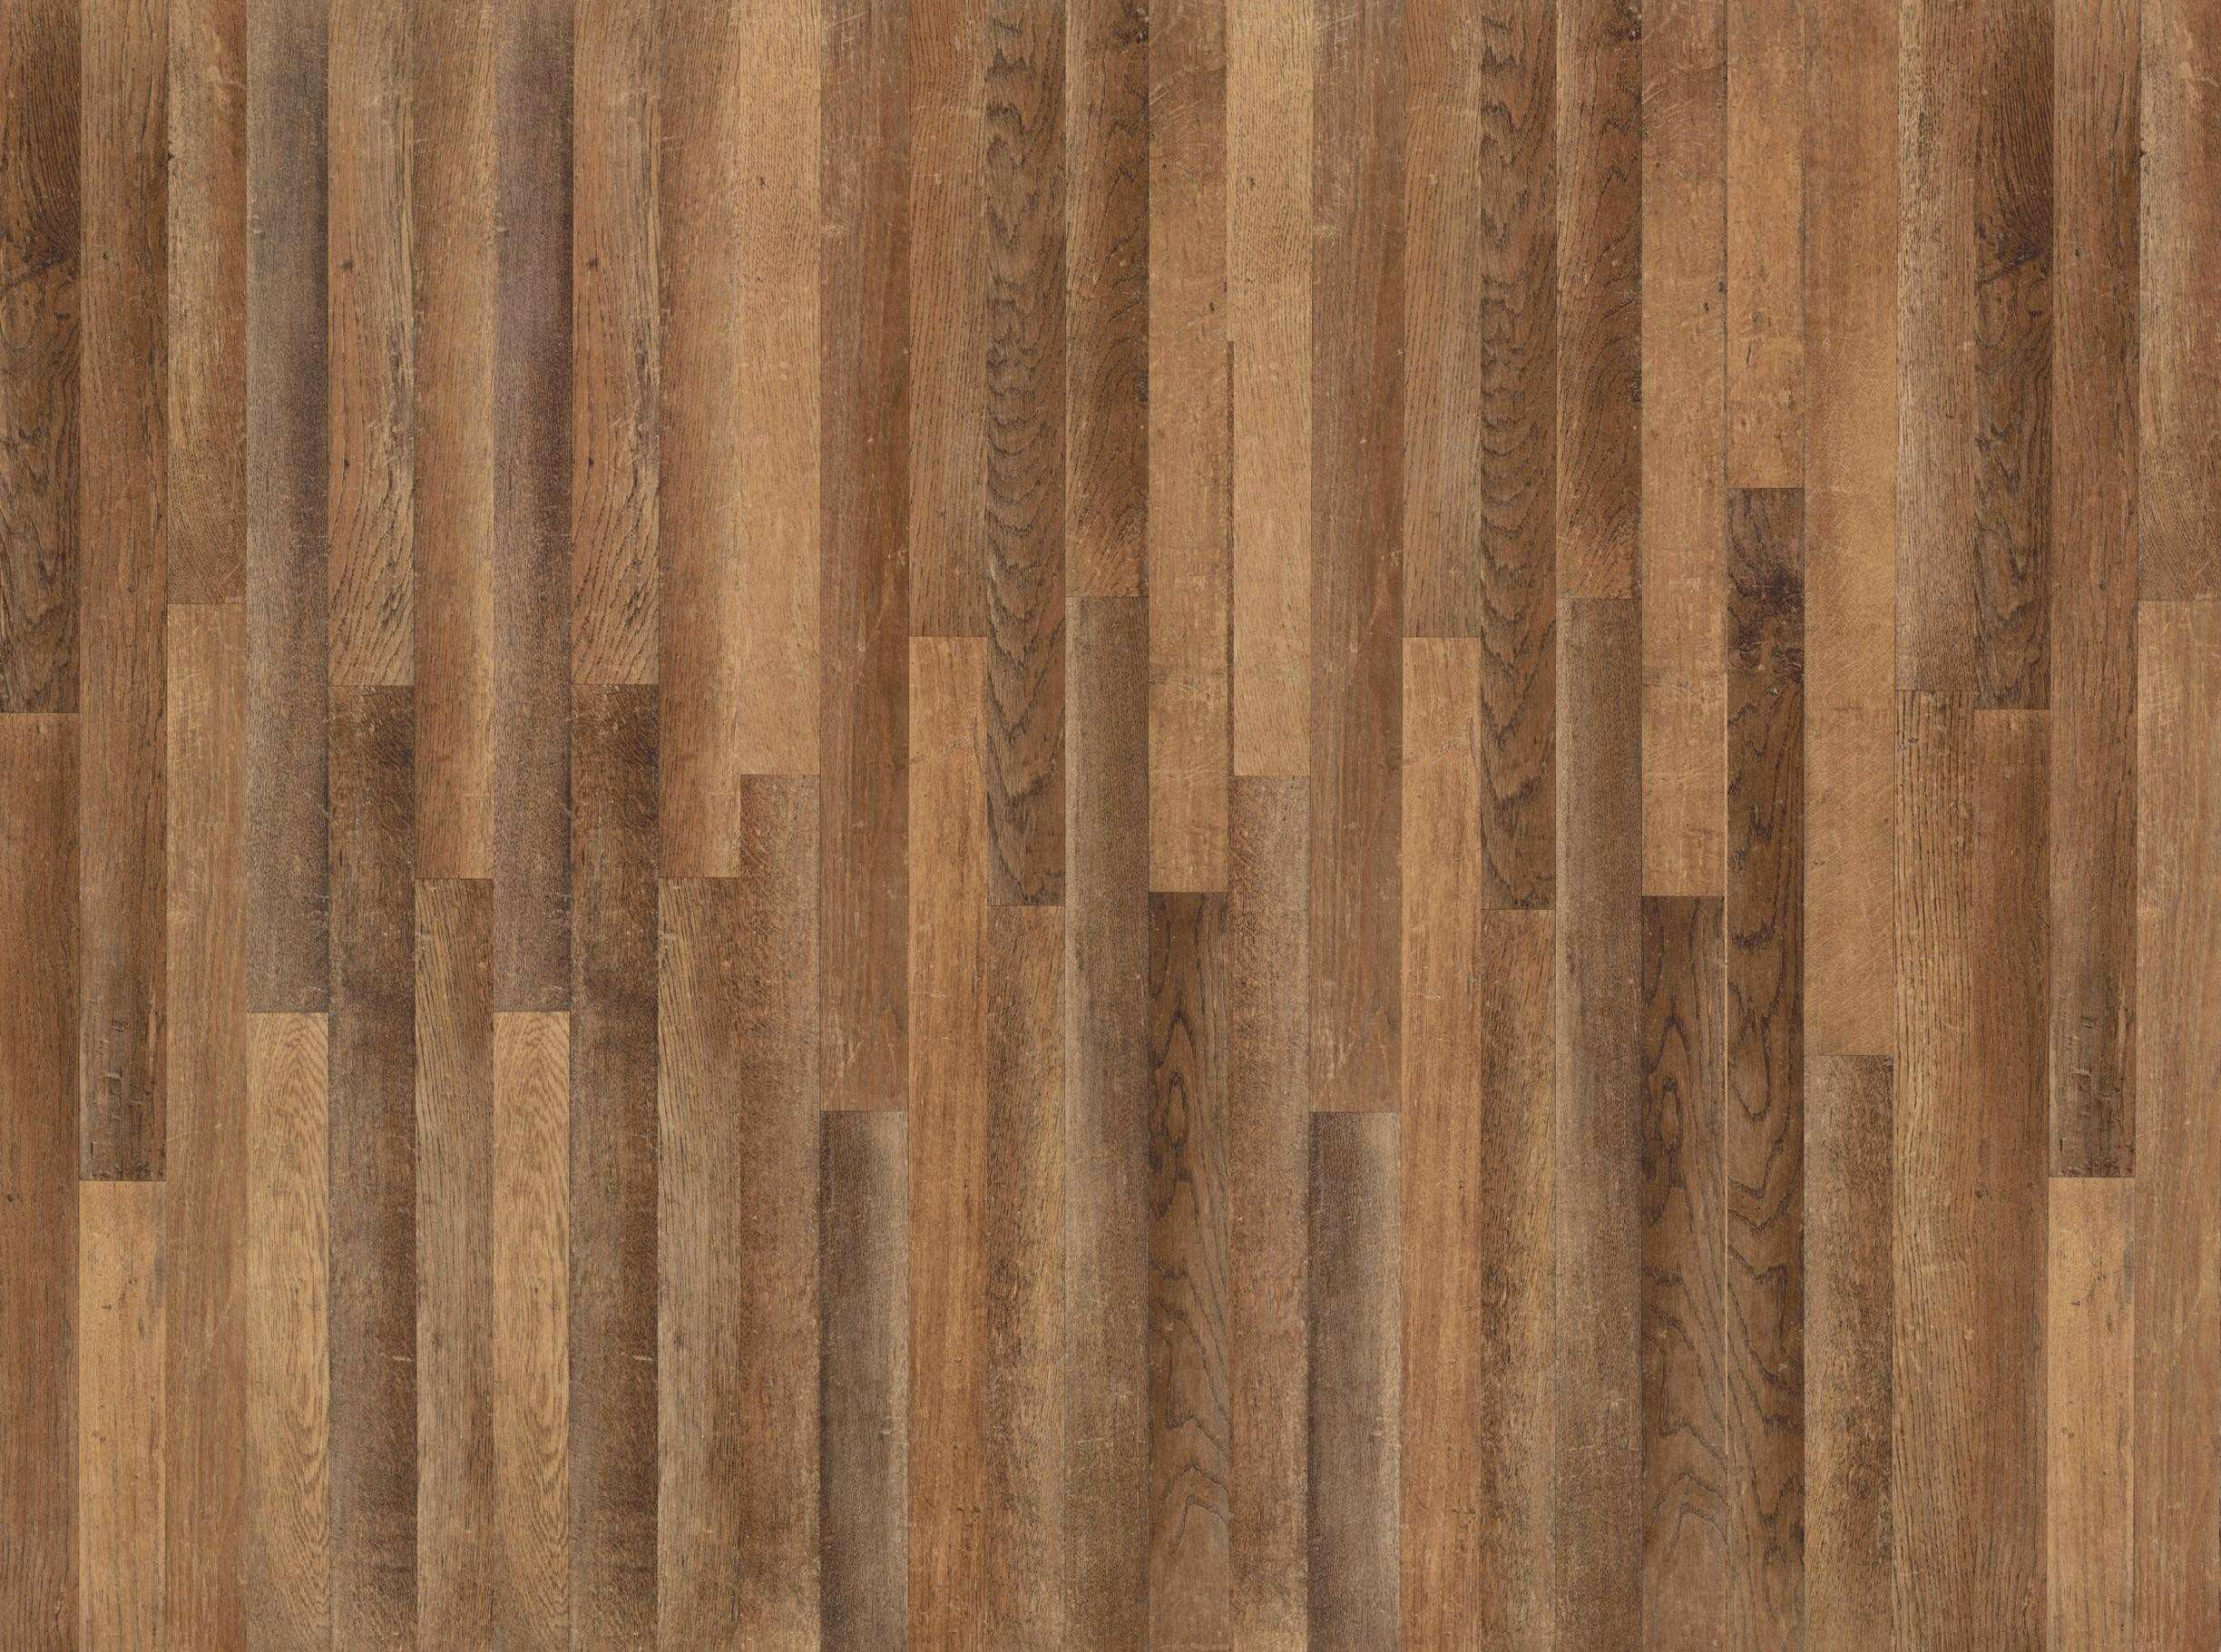 16 attractive Hardwood Floor Padding Lowes 2024 free download hardwood floor padding lowes of vinyl laminate flooring lowes lovely shop wood looks at lowes for vinyl laminate flooring lowes lovely 50 beautiful laminate tile flooring lowes pics 50 s of 